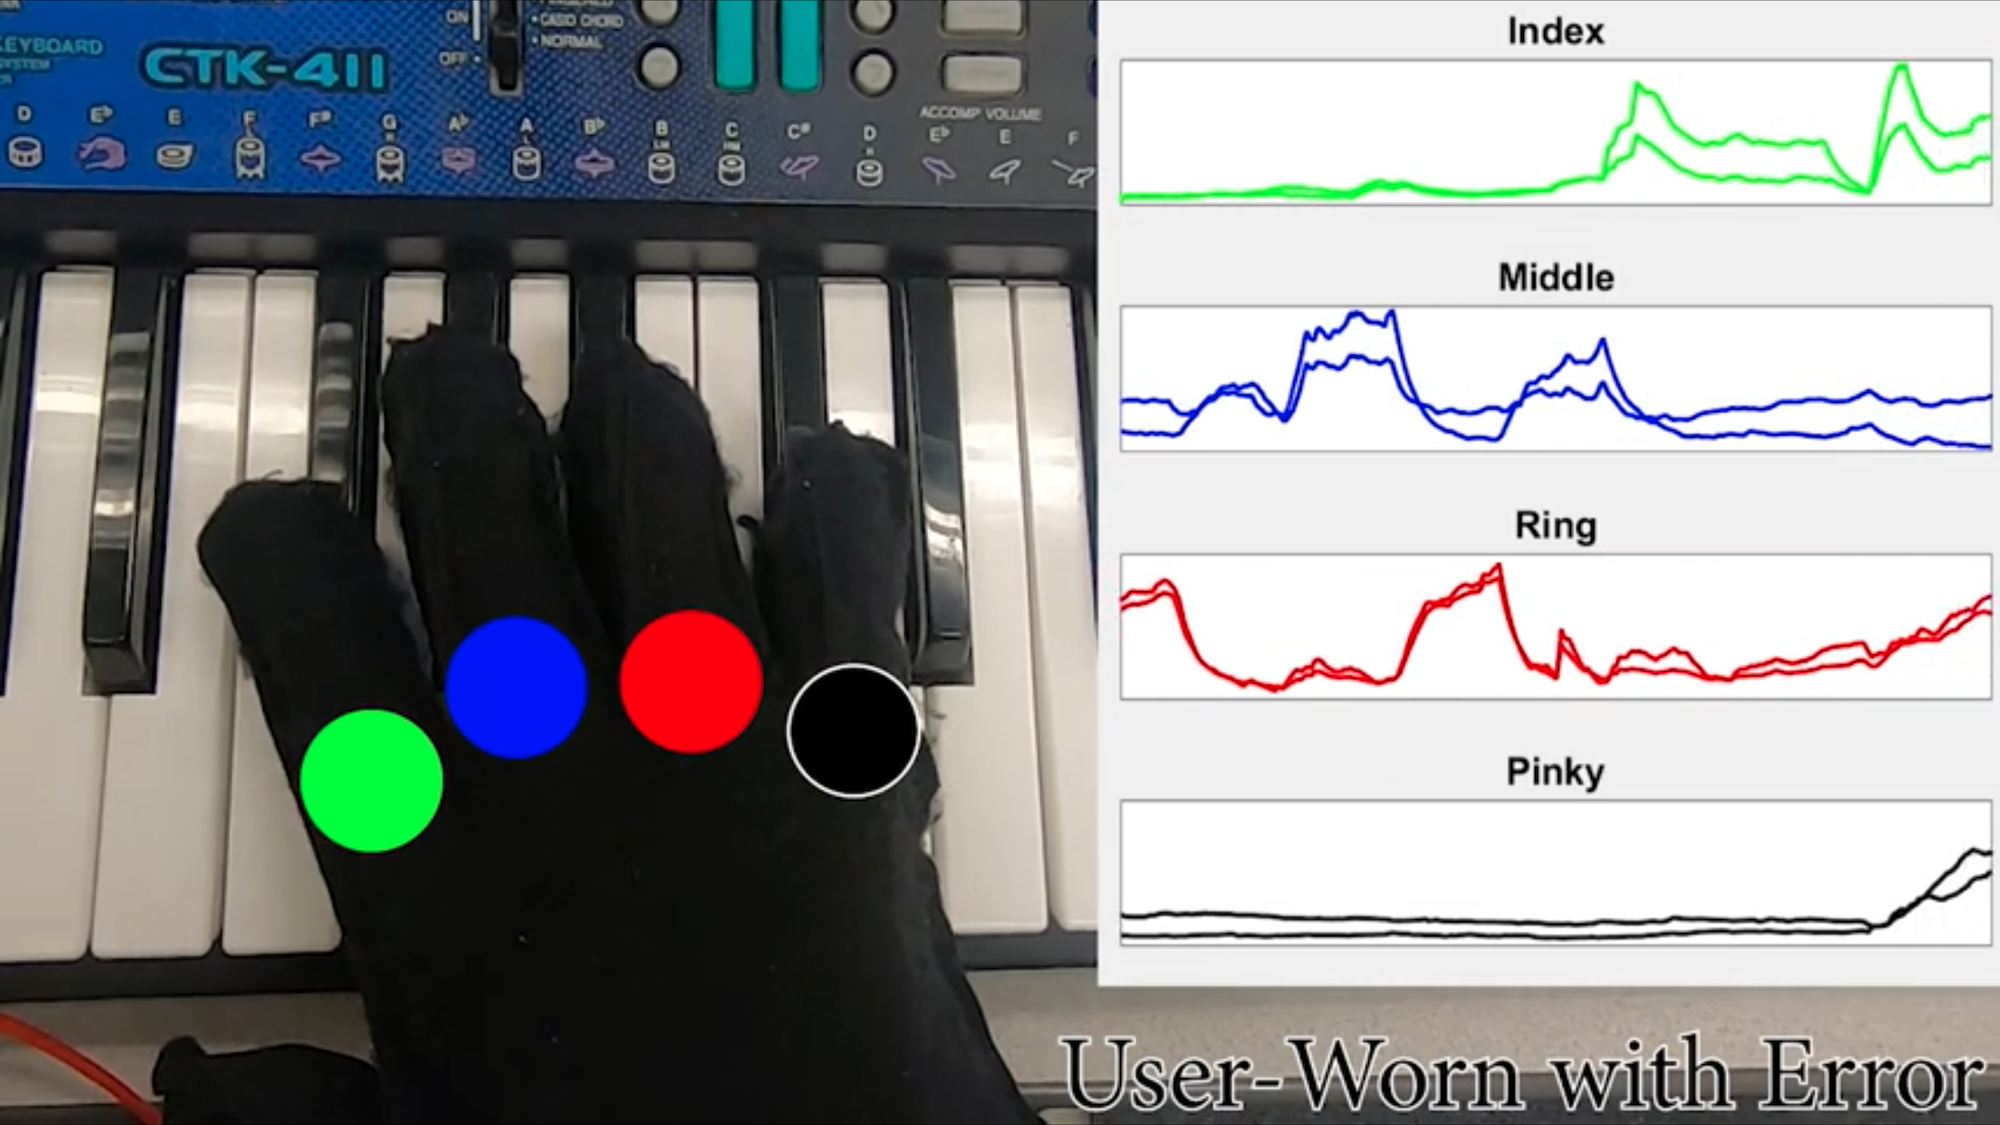 A hand wearing a smart glove playing keyboard next to computer readings of movements